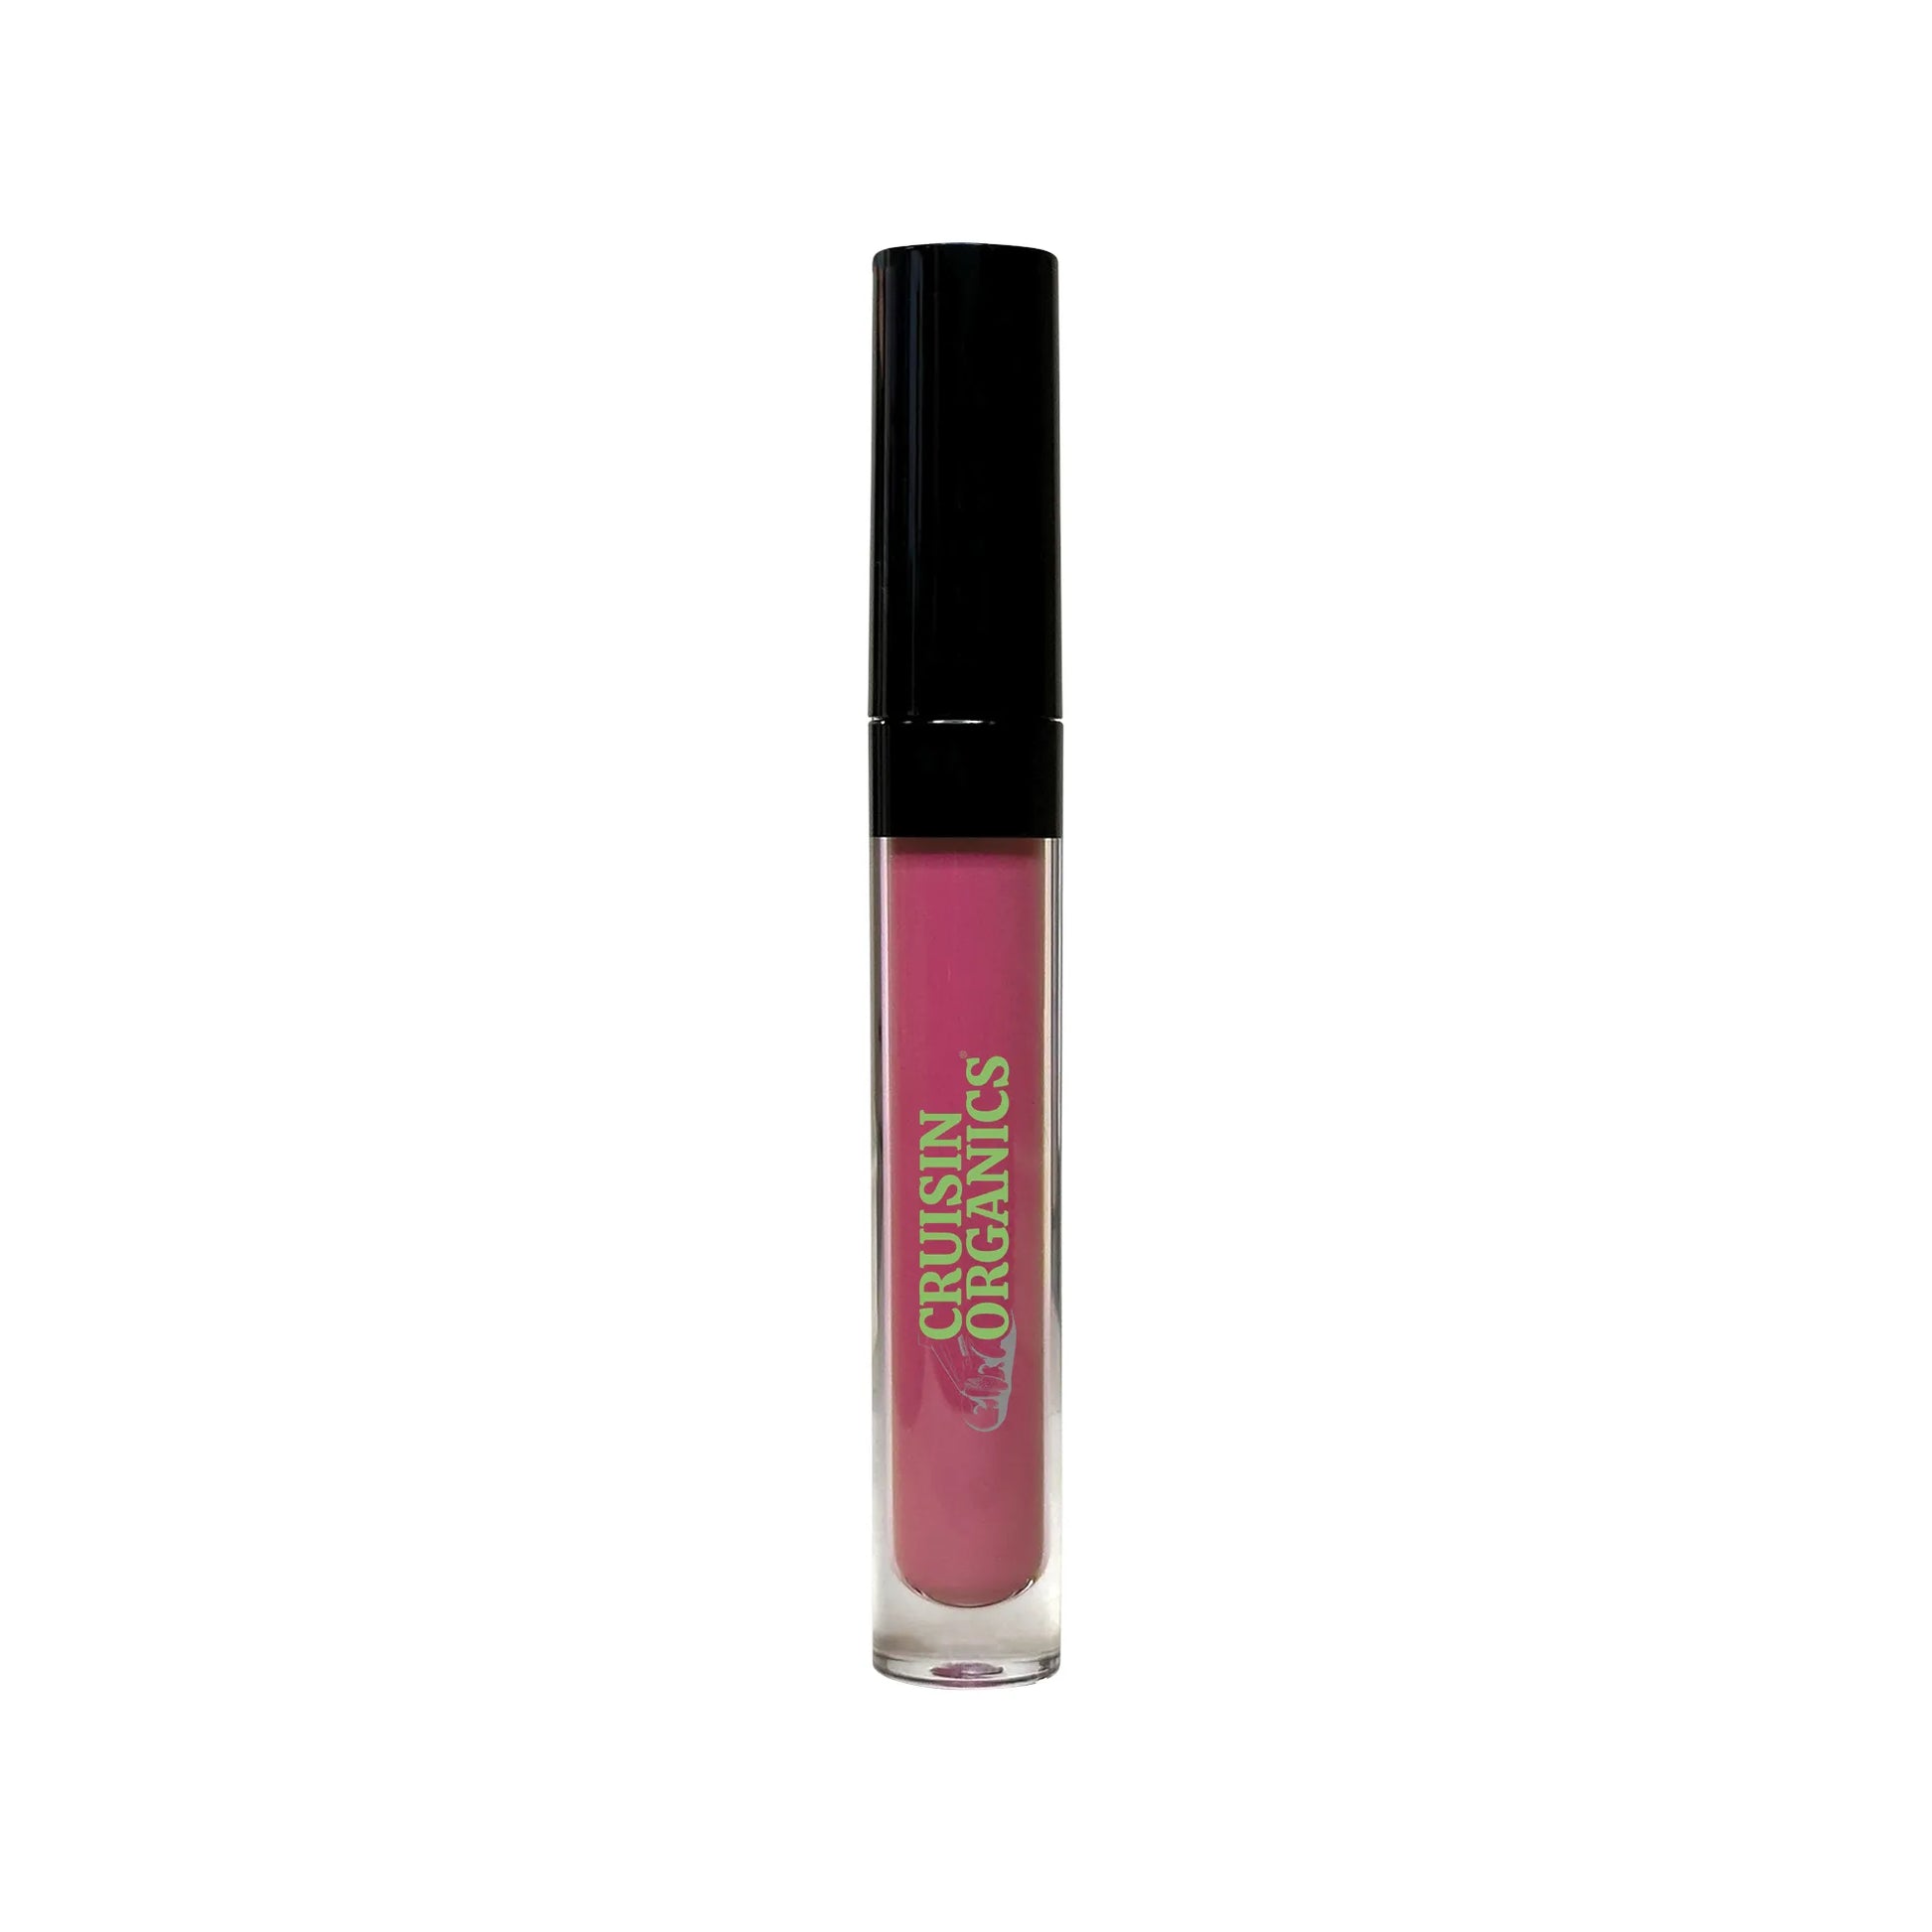 Cruisin Organics Berry Liquid to Matte Lipstick—an embodiment of the most trendy colors accompanied by comfortable all-day wear that conveniently fits in your back pocket. Immerse yourself in the realm of highly berry-pigmented shades, perfect for any occasion. The Liquid to Matte Lipstick features a slanted doe applicator that guarantees precise, hassle-free application.